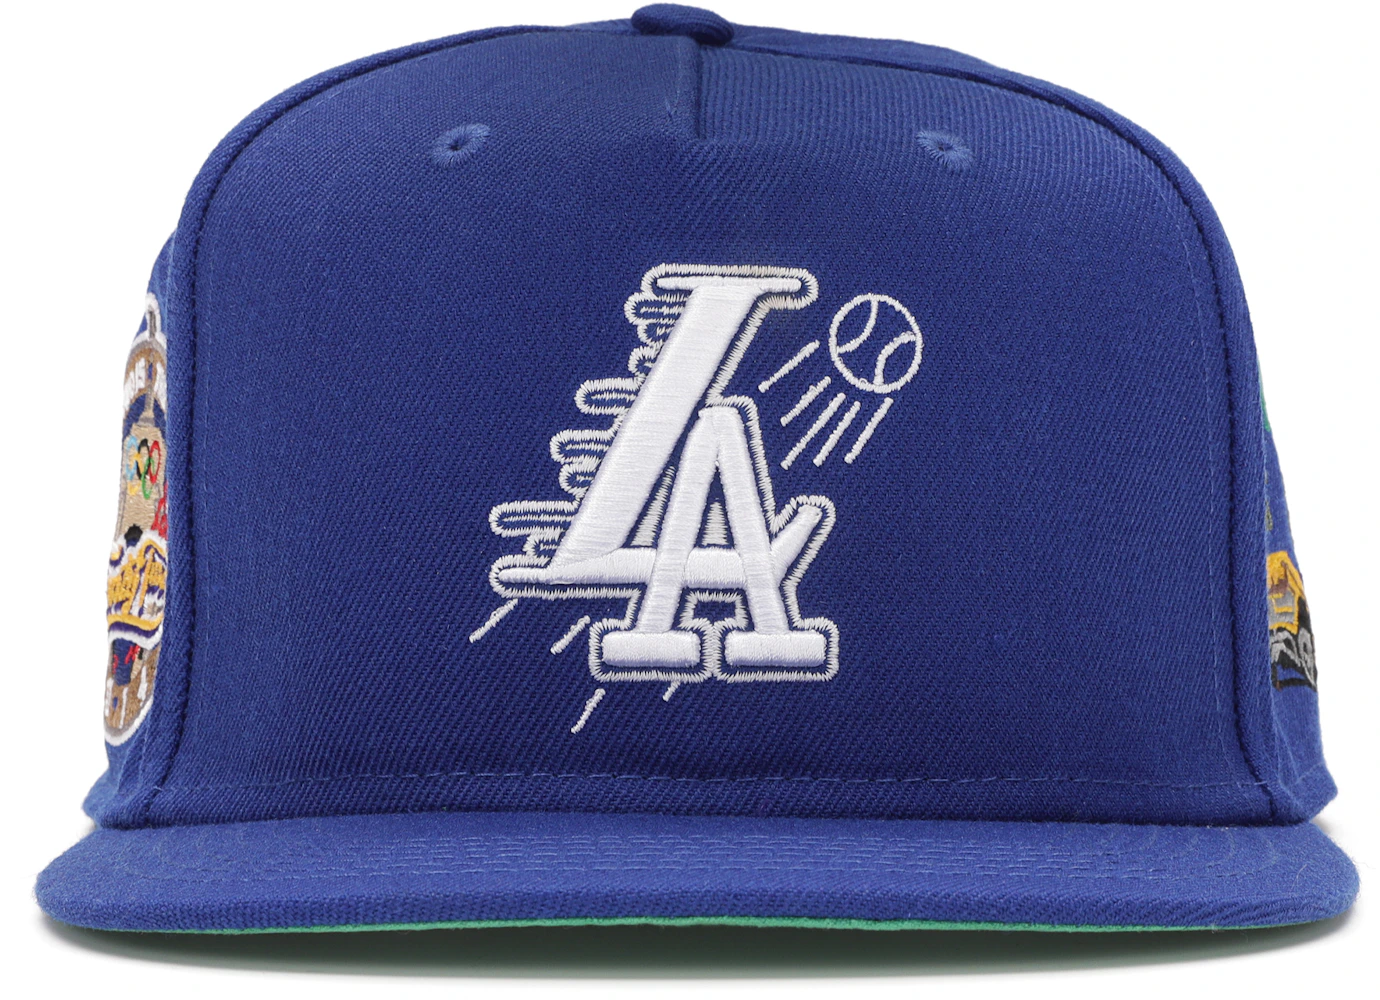 Twnty two cap lakers champions hat Lebron hat lakers dodgers